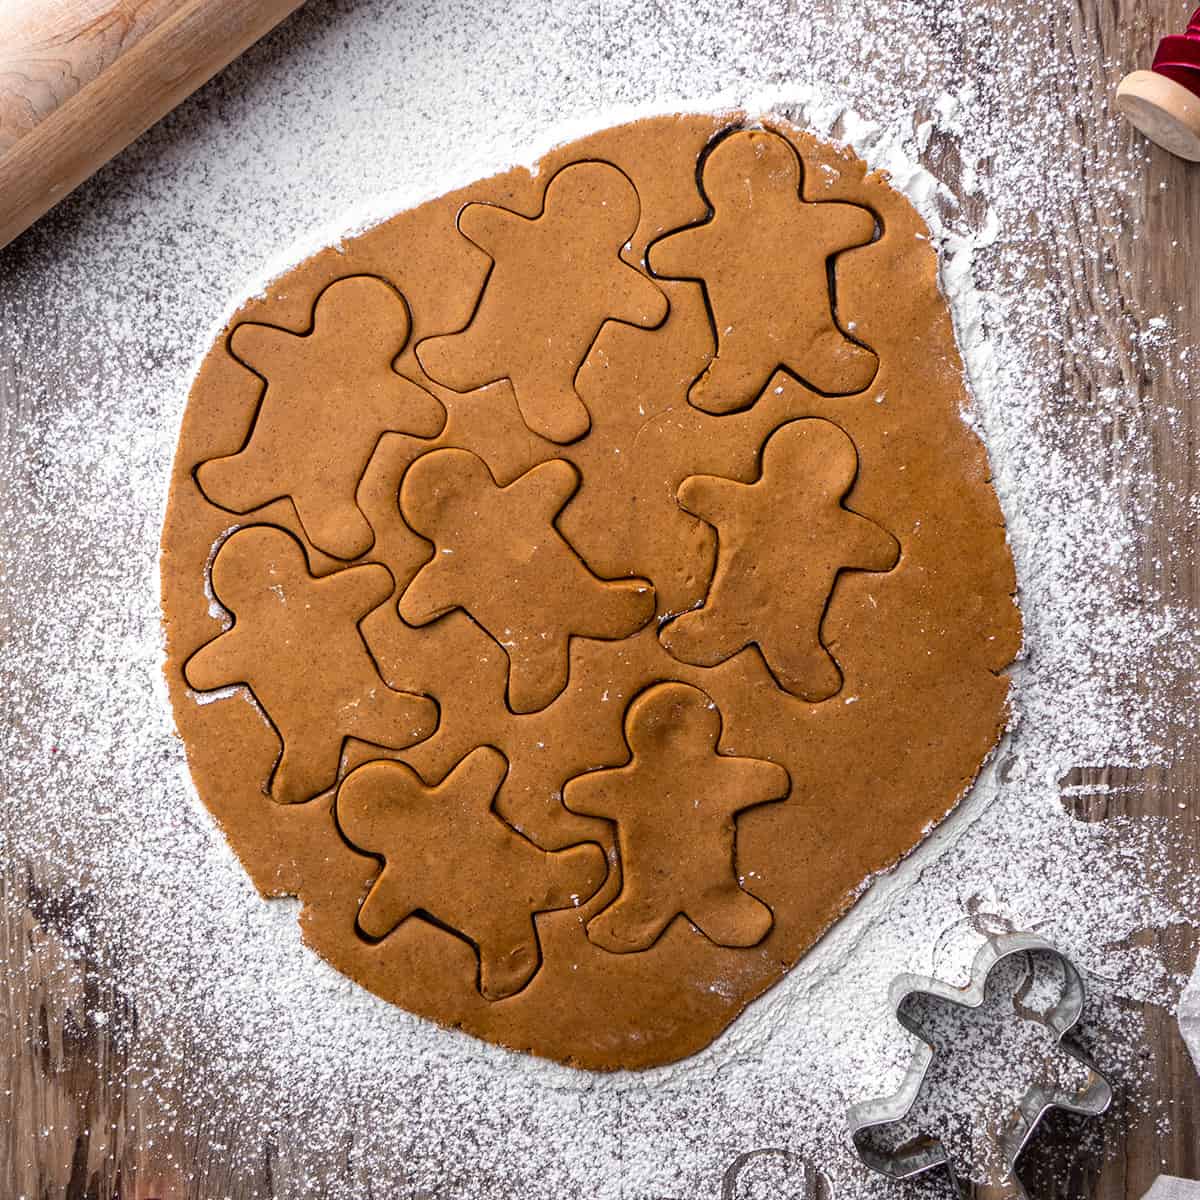 gingerbread cookie dough with gingerbread men cut out of it